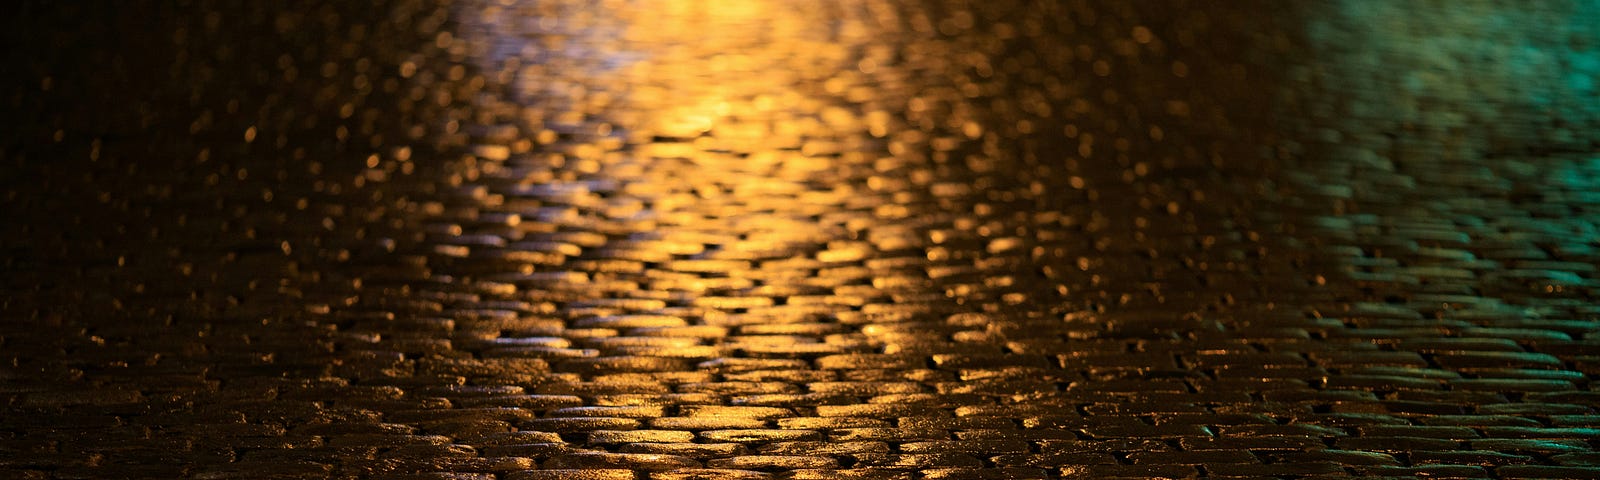 Wet paved road at night reflecting a golden hue from the streetlight.